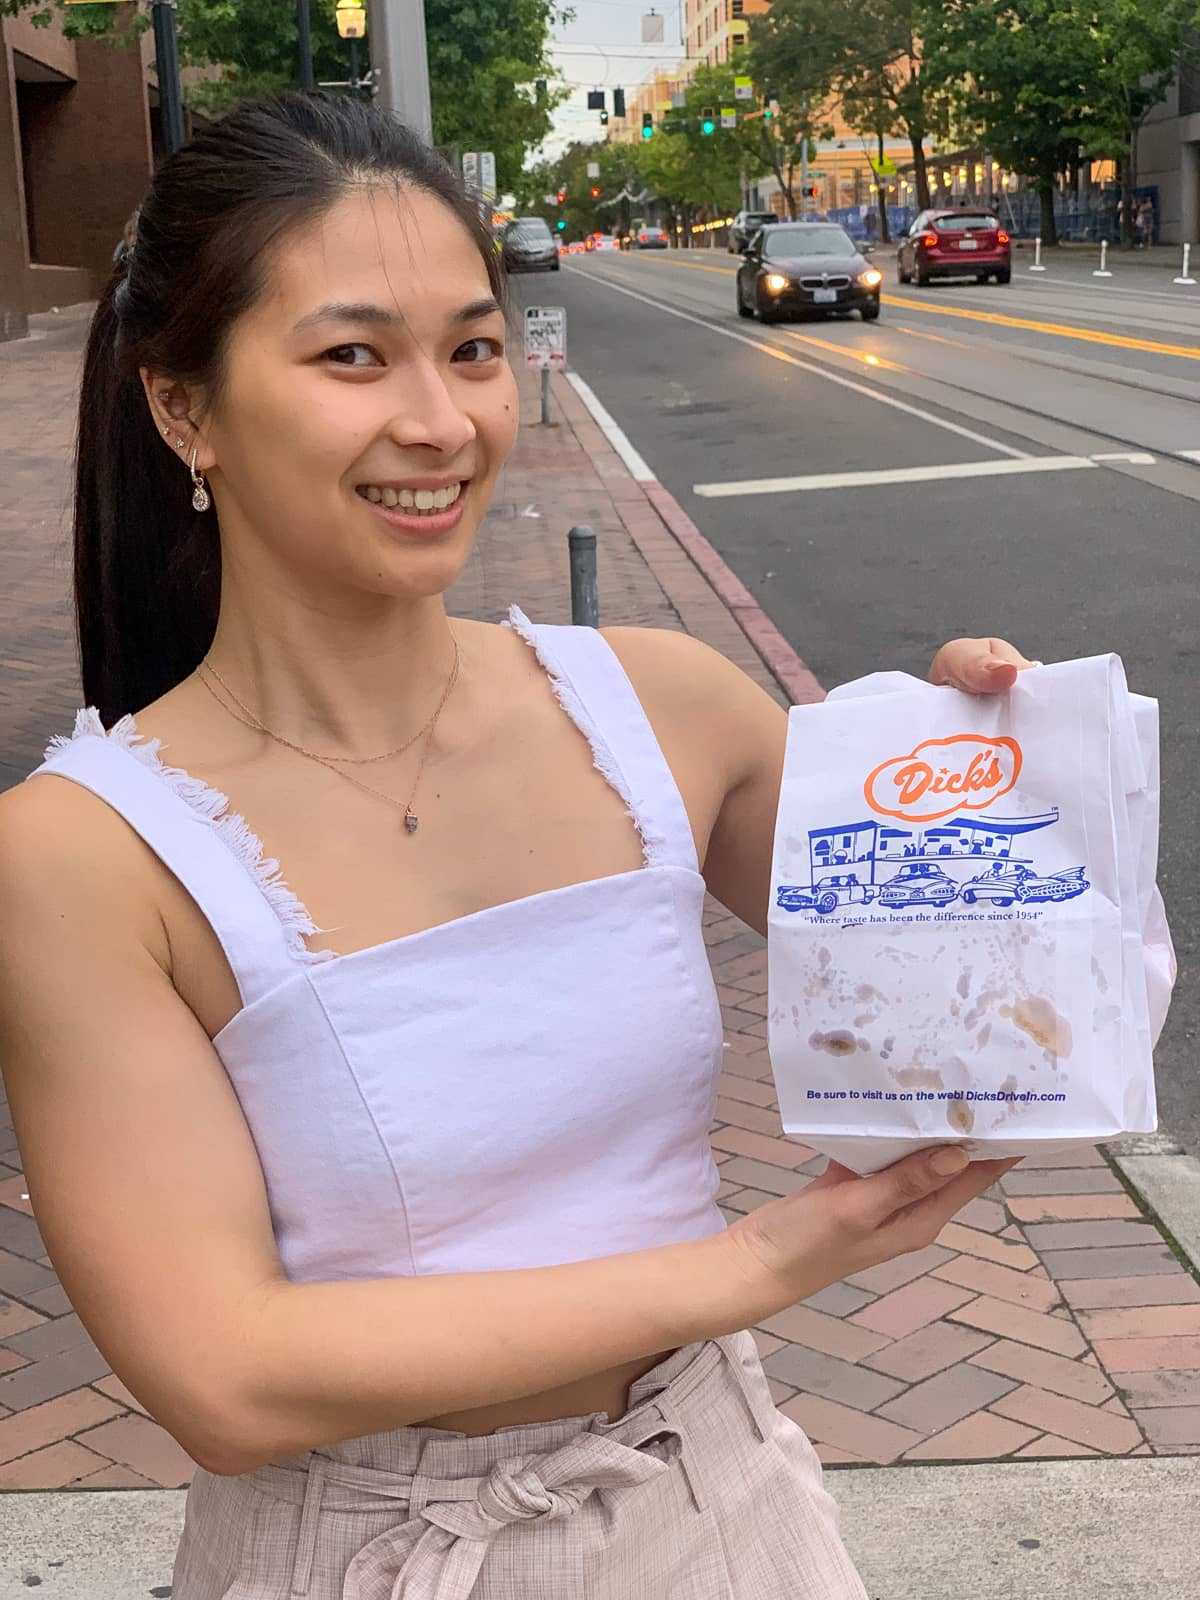 A woman with dark hair wearing a white strapless top, standing in the street holding up a paper bag reading “Dick’s”